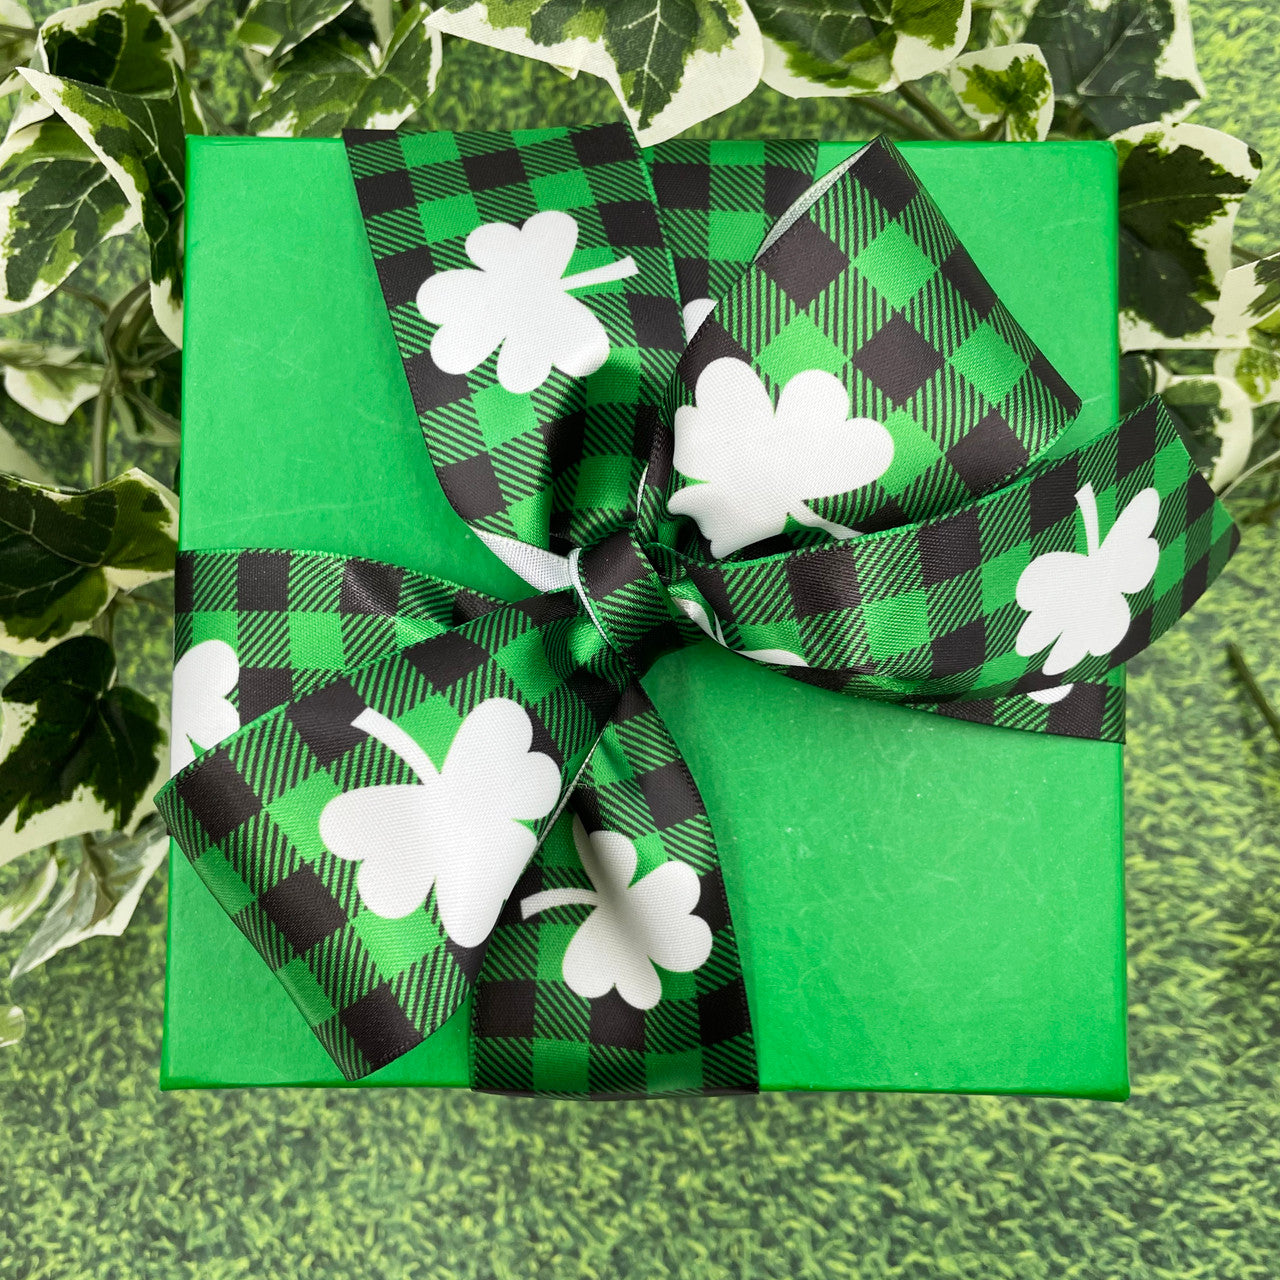 Tie an beautiful bow on a simple background for a fun  St. Patrick's Day gift! 